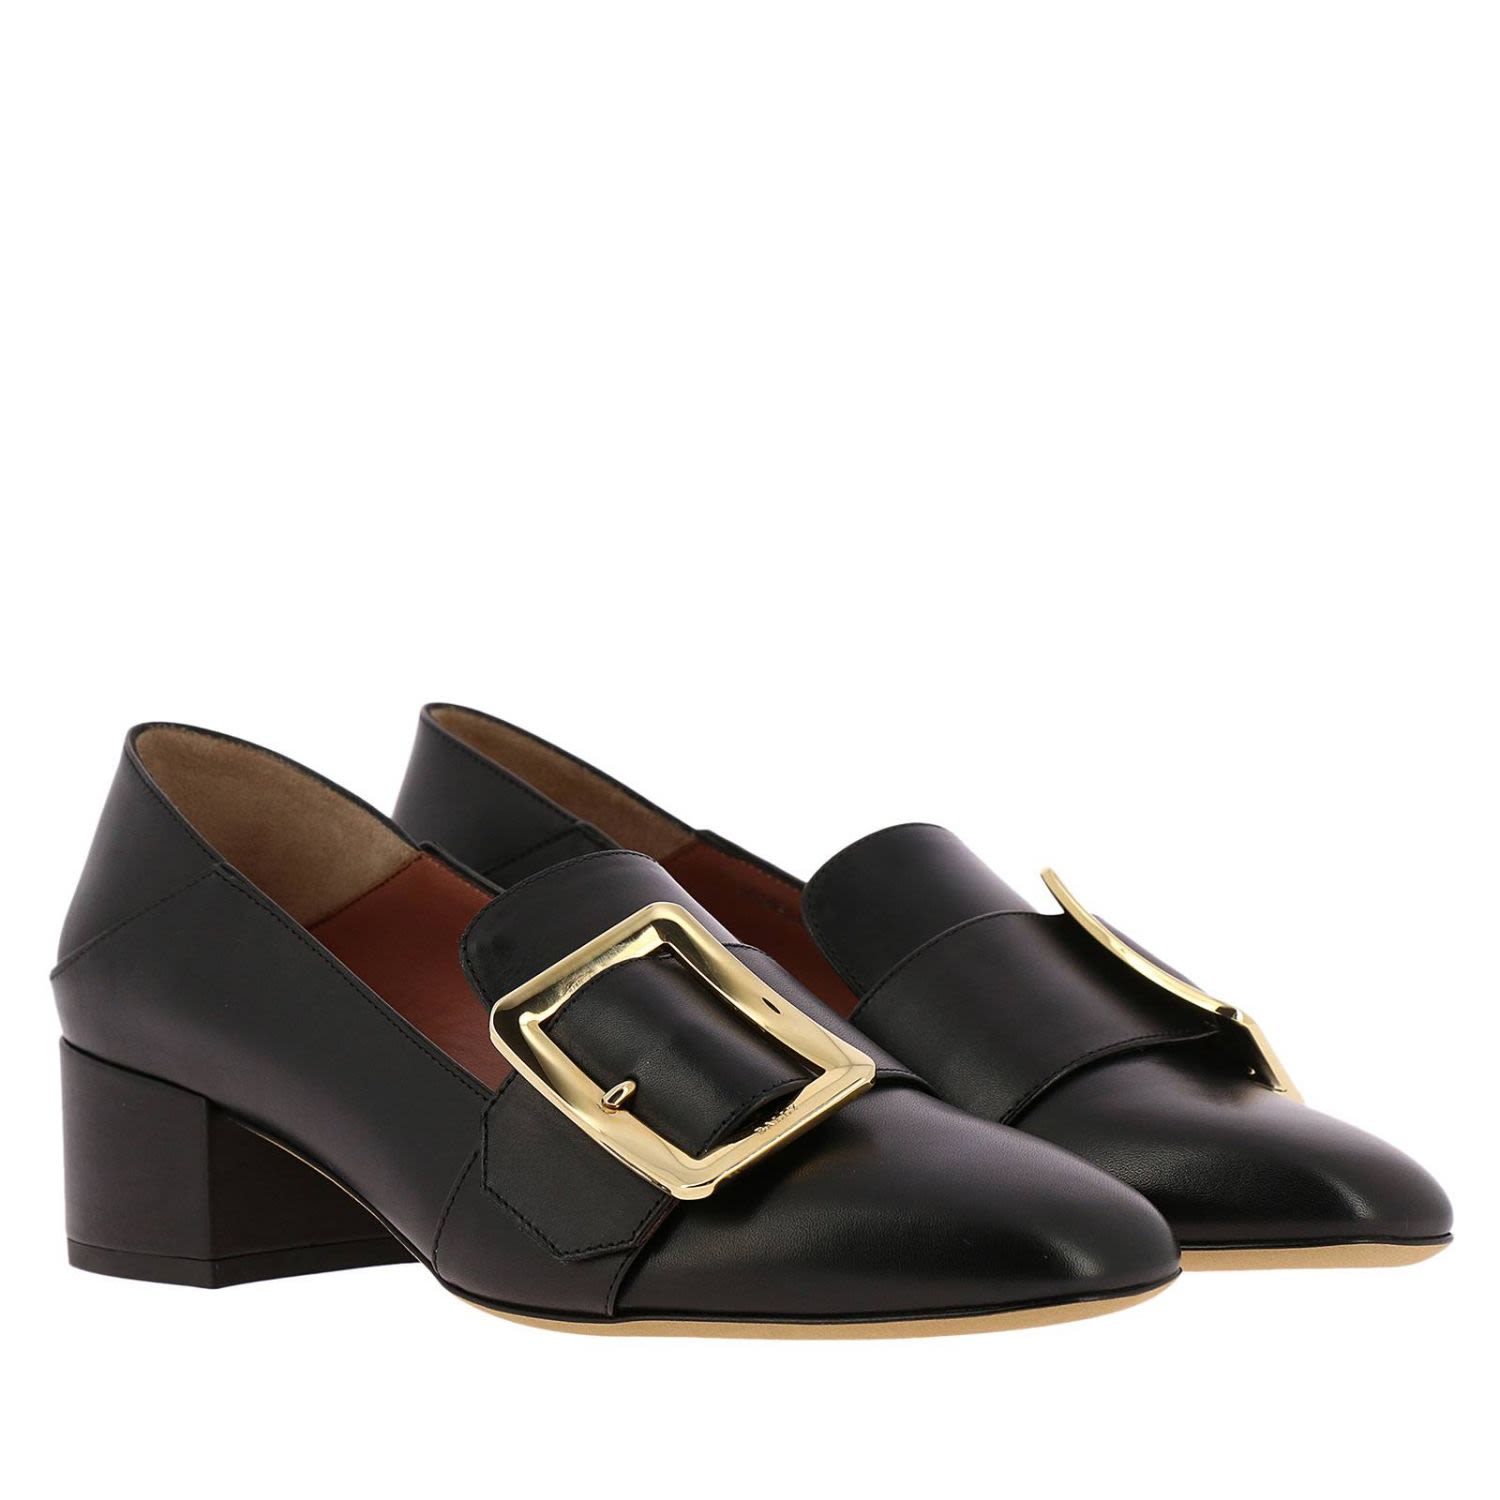 italist | Best price in the market for Bally Pumps Shoes Women Bally ...